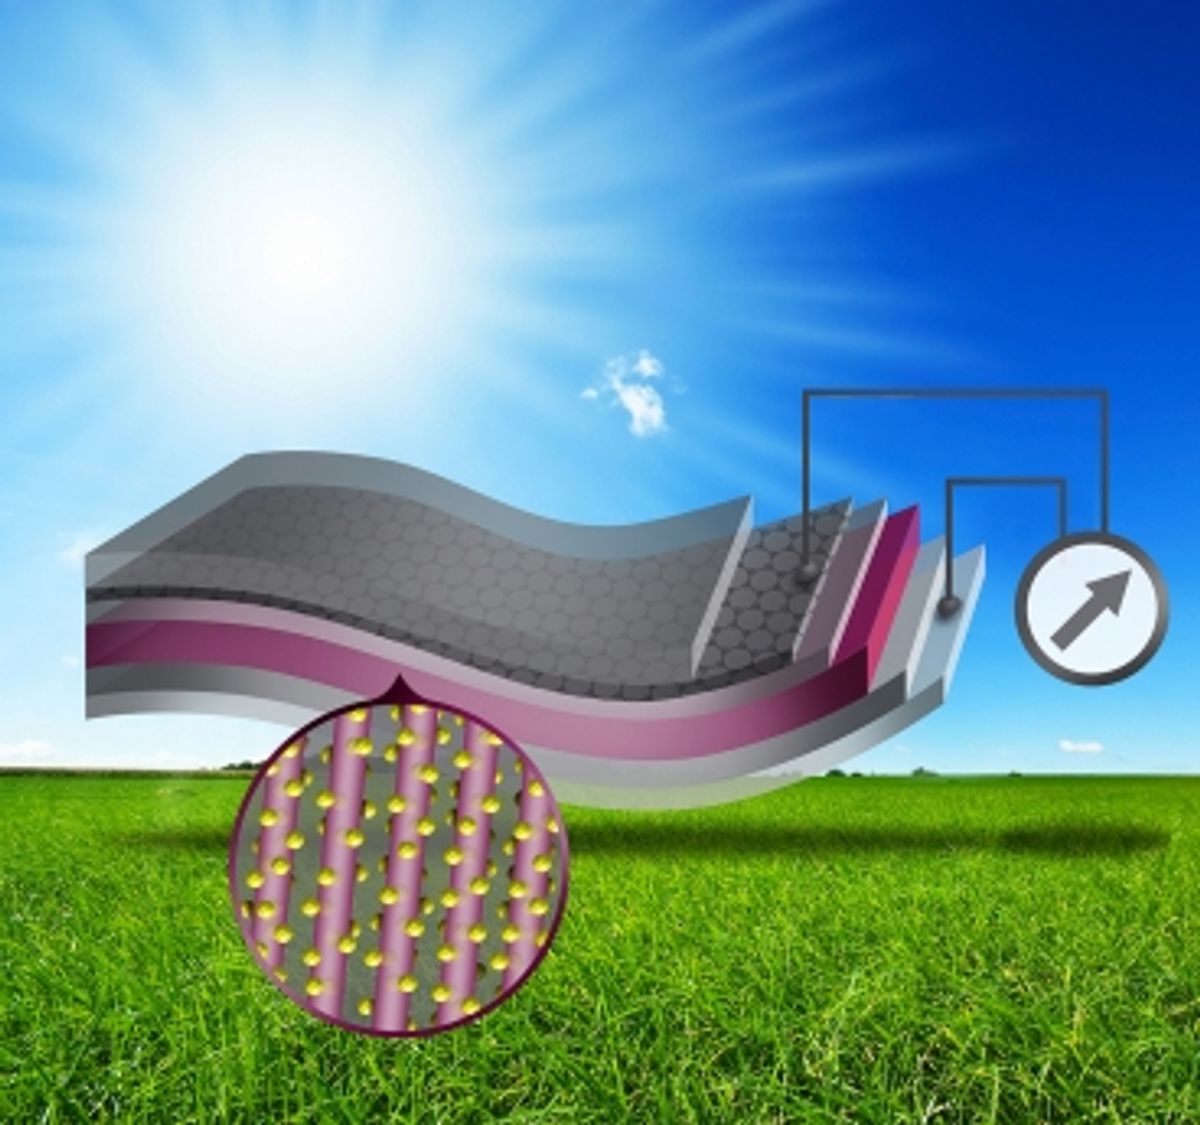 Graphene Still Trying to Replace ITO in Organic Solar Cells